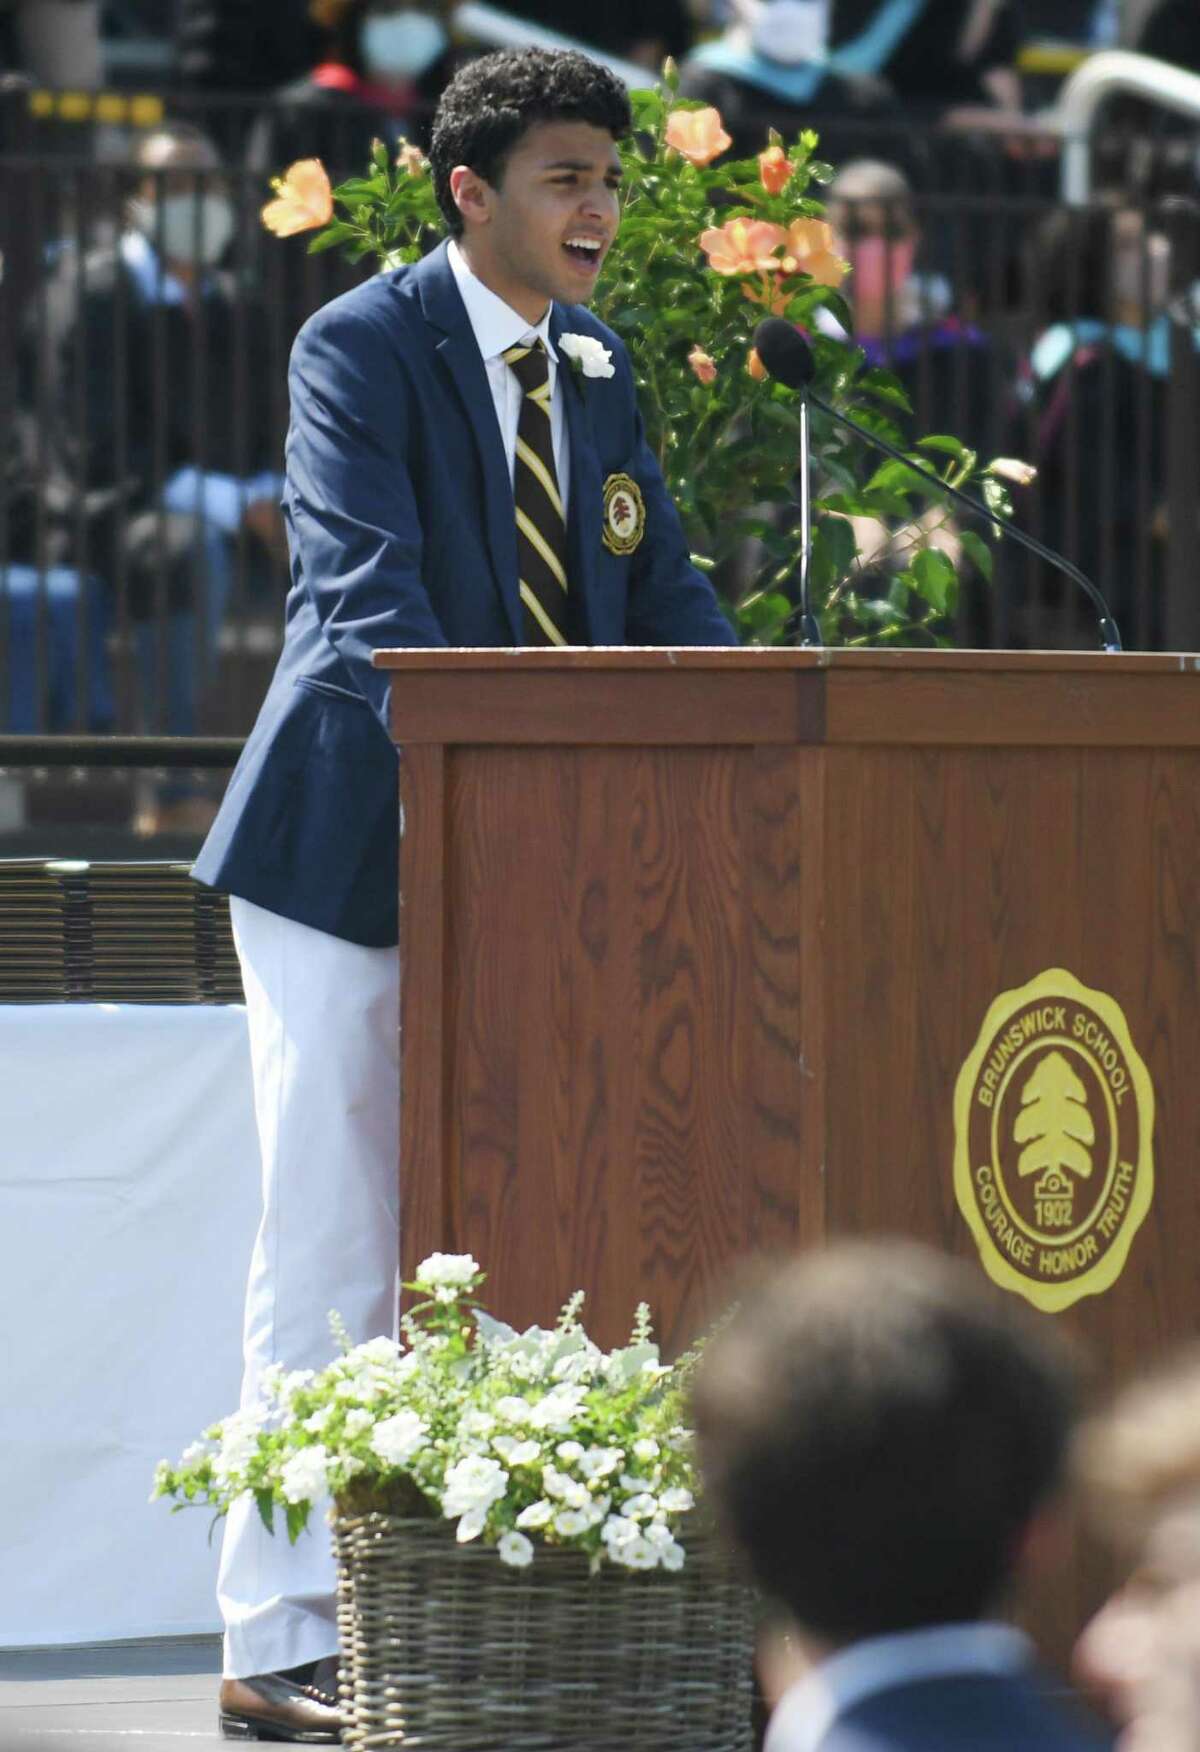 Valedictorian and "Ivy Speaker" Ali Hindy speaks at the 2021 commencement ceremony at Brunswick School in Greenwich, Conn. Wednesday, May 19, 2021. 104 students graduated during the outdoor ceremony at Cosby Field, featuring a virtual commencement speech by Connecticut Gov. Ned Lamont.